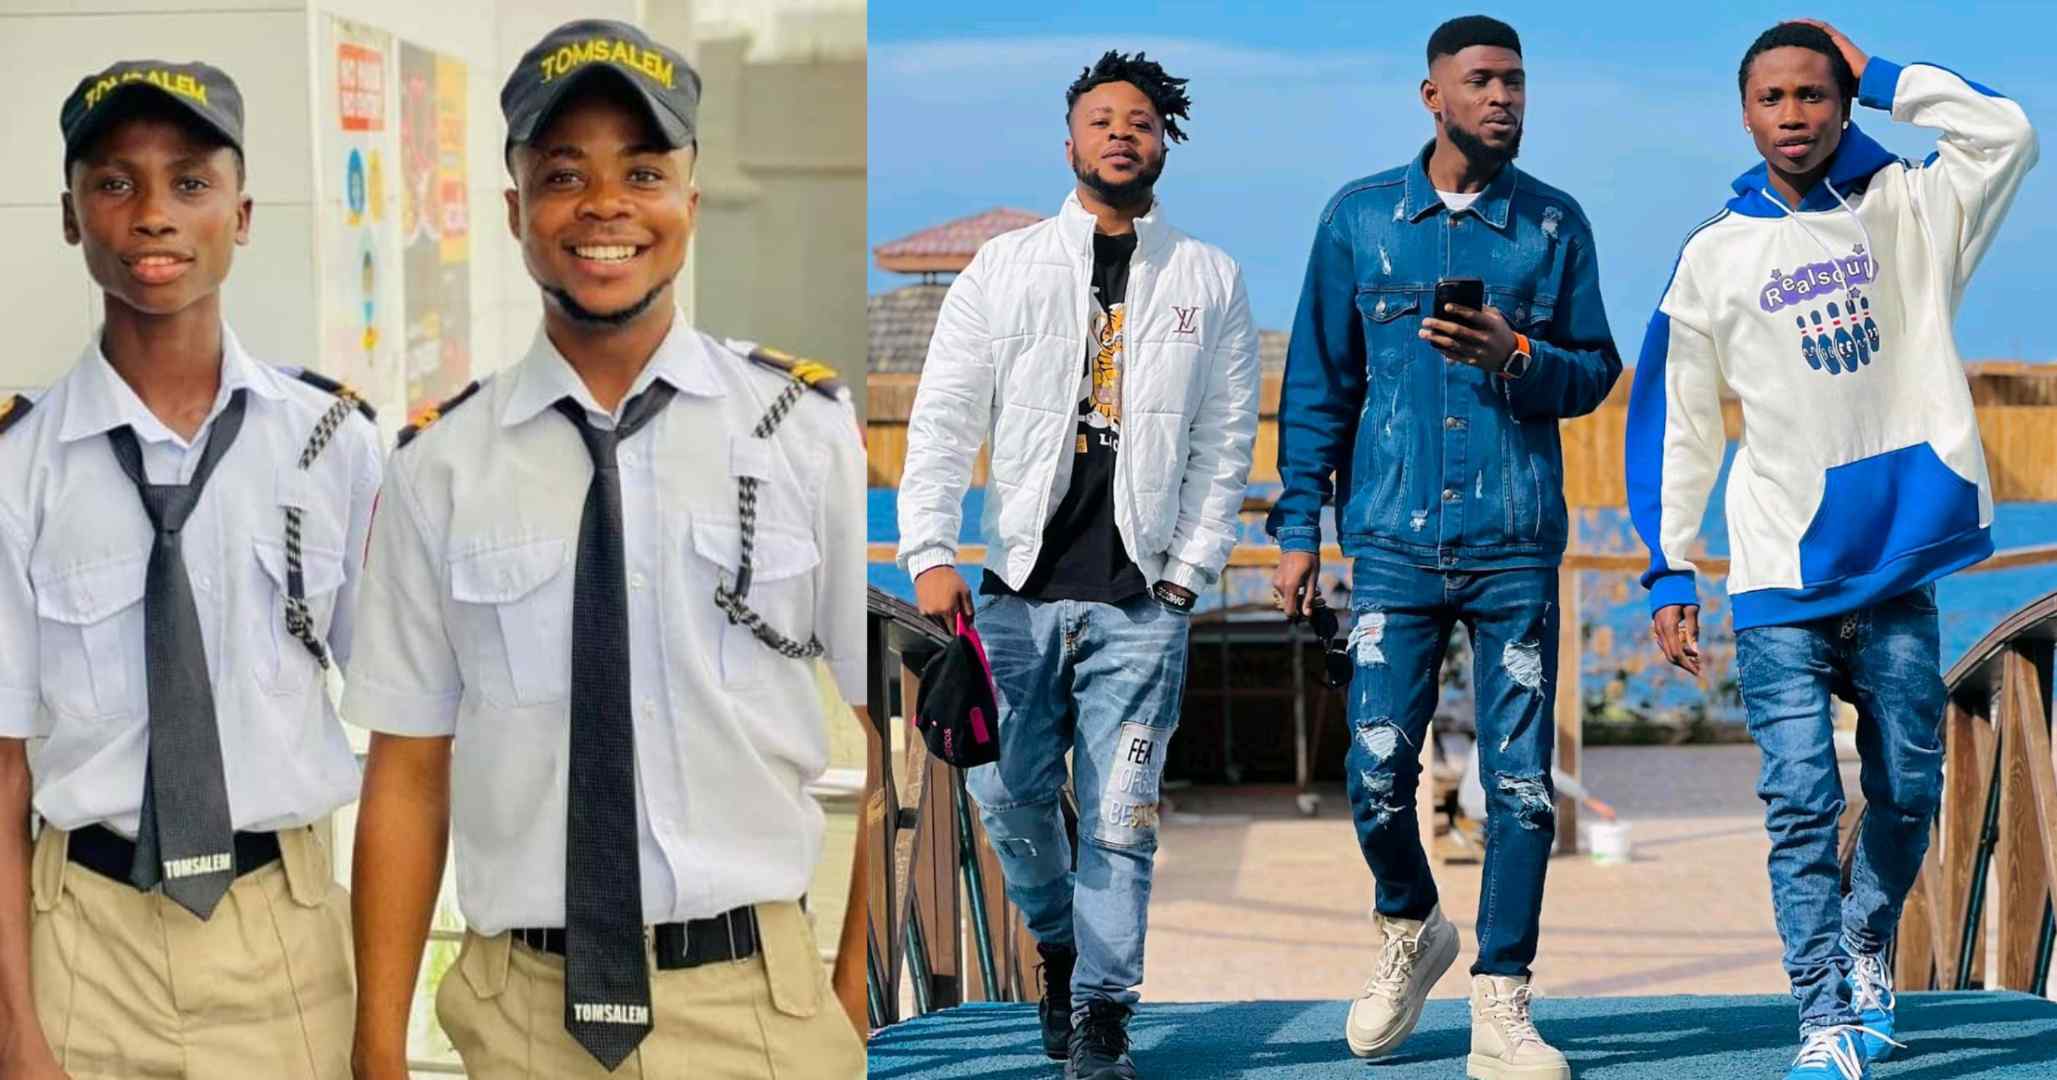 Transformation photo of viral dancing security guards surfaces